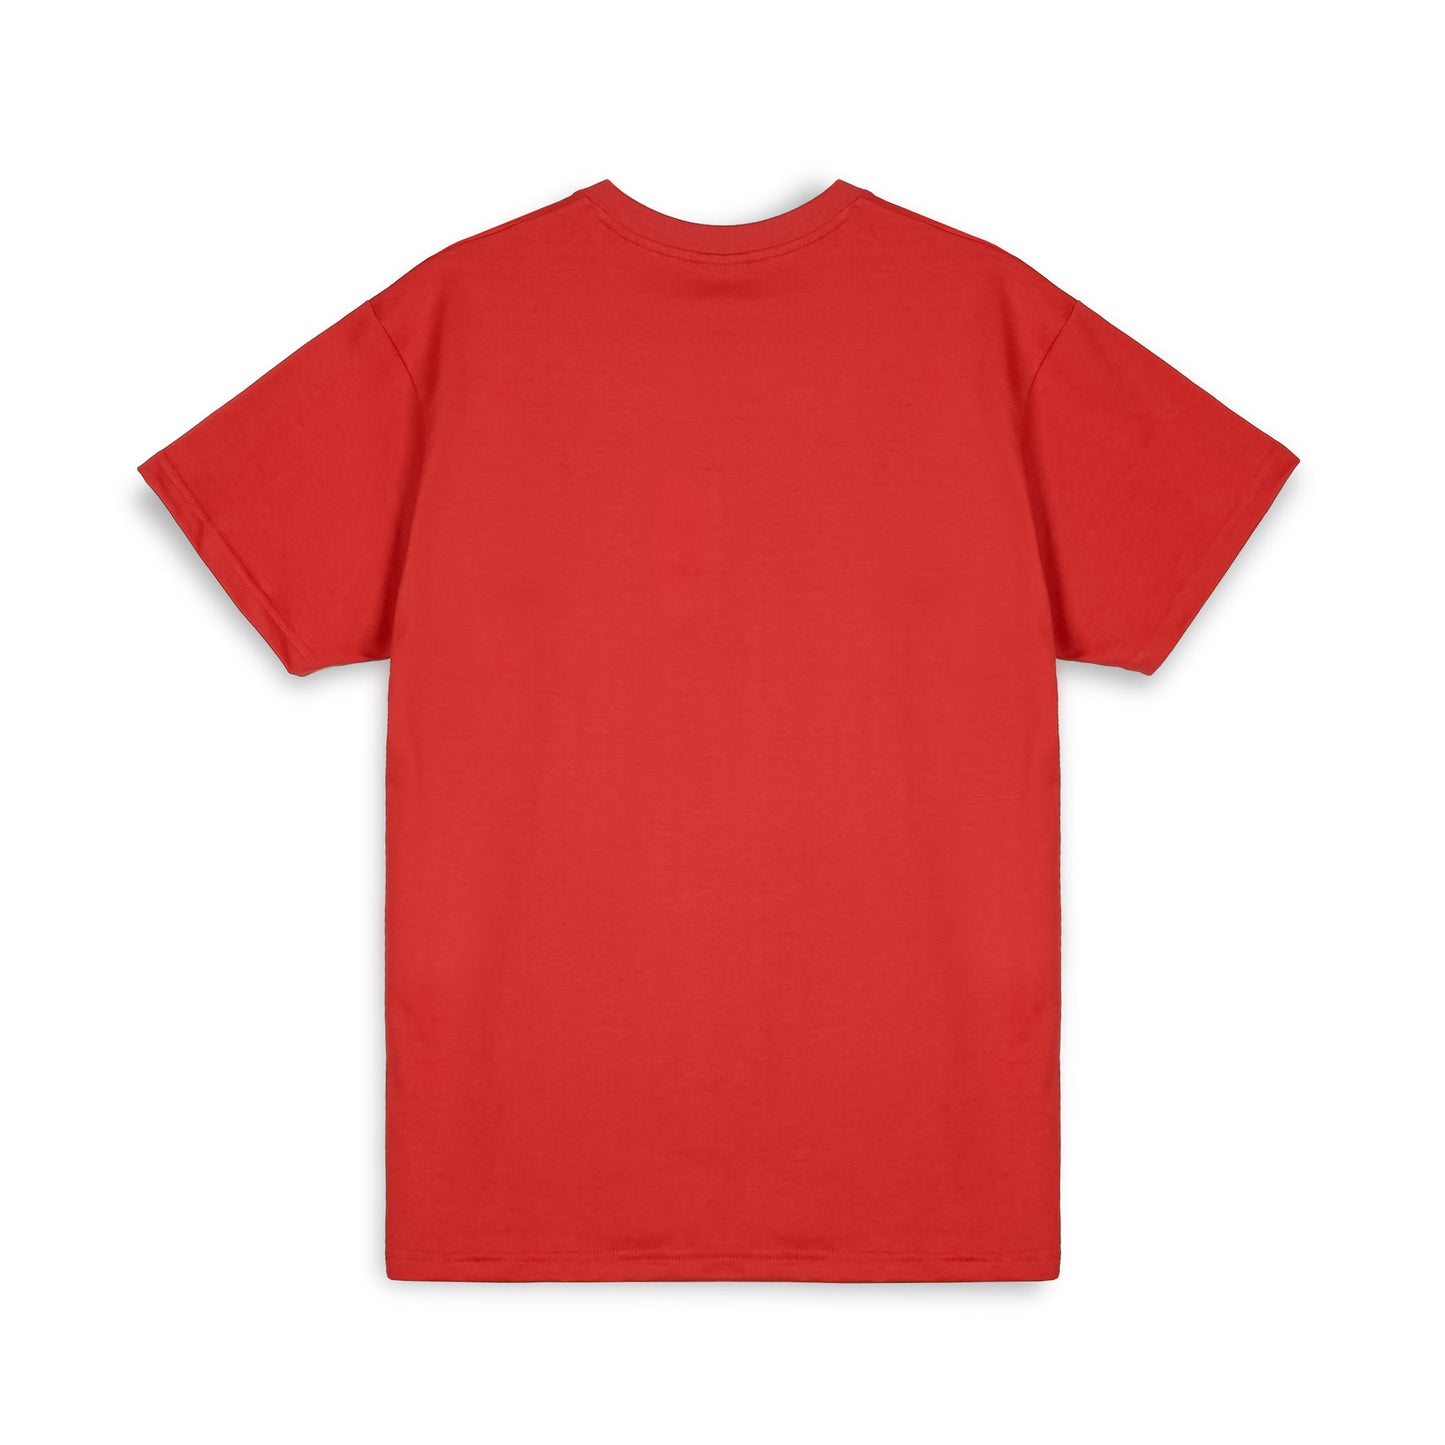 THE MOVE ON OVER (LUCKY DRAGON) REGULAR TEE RED